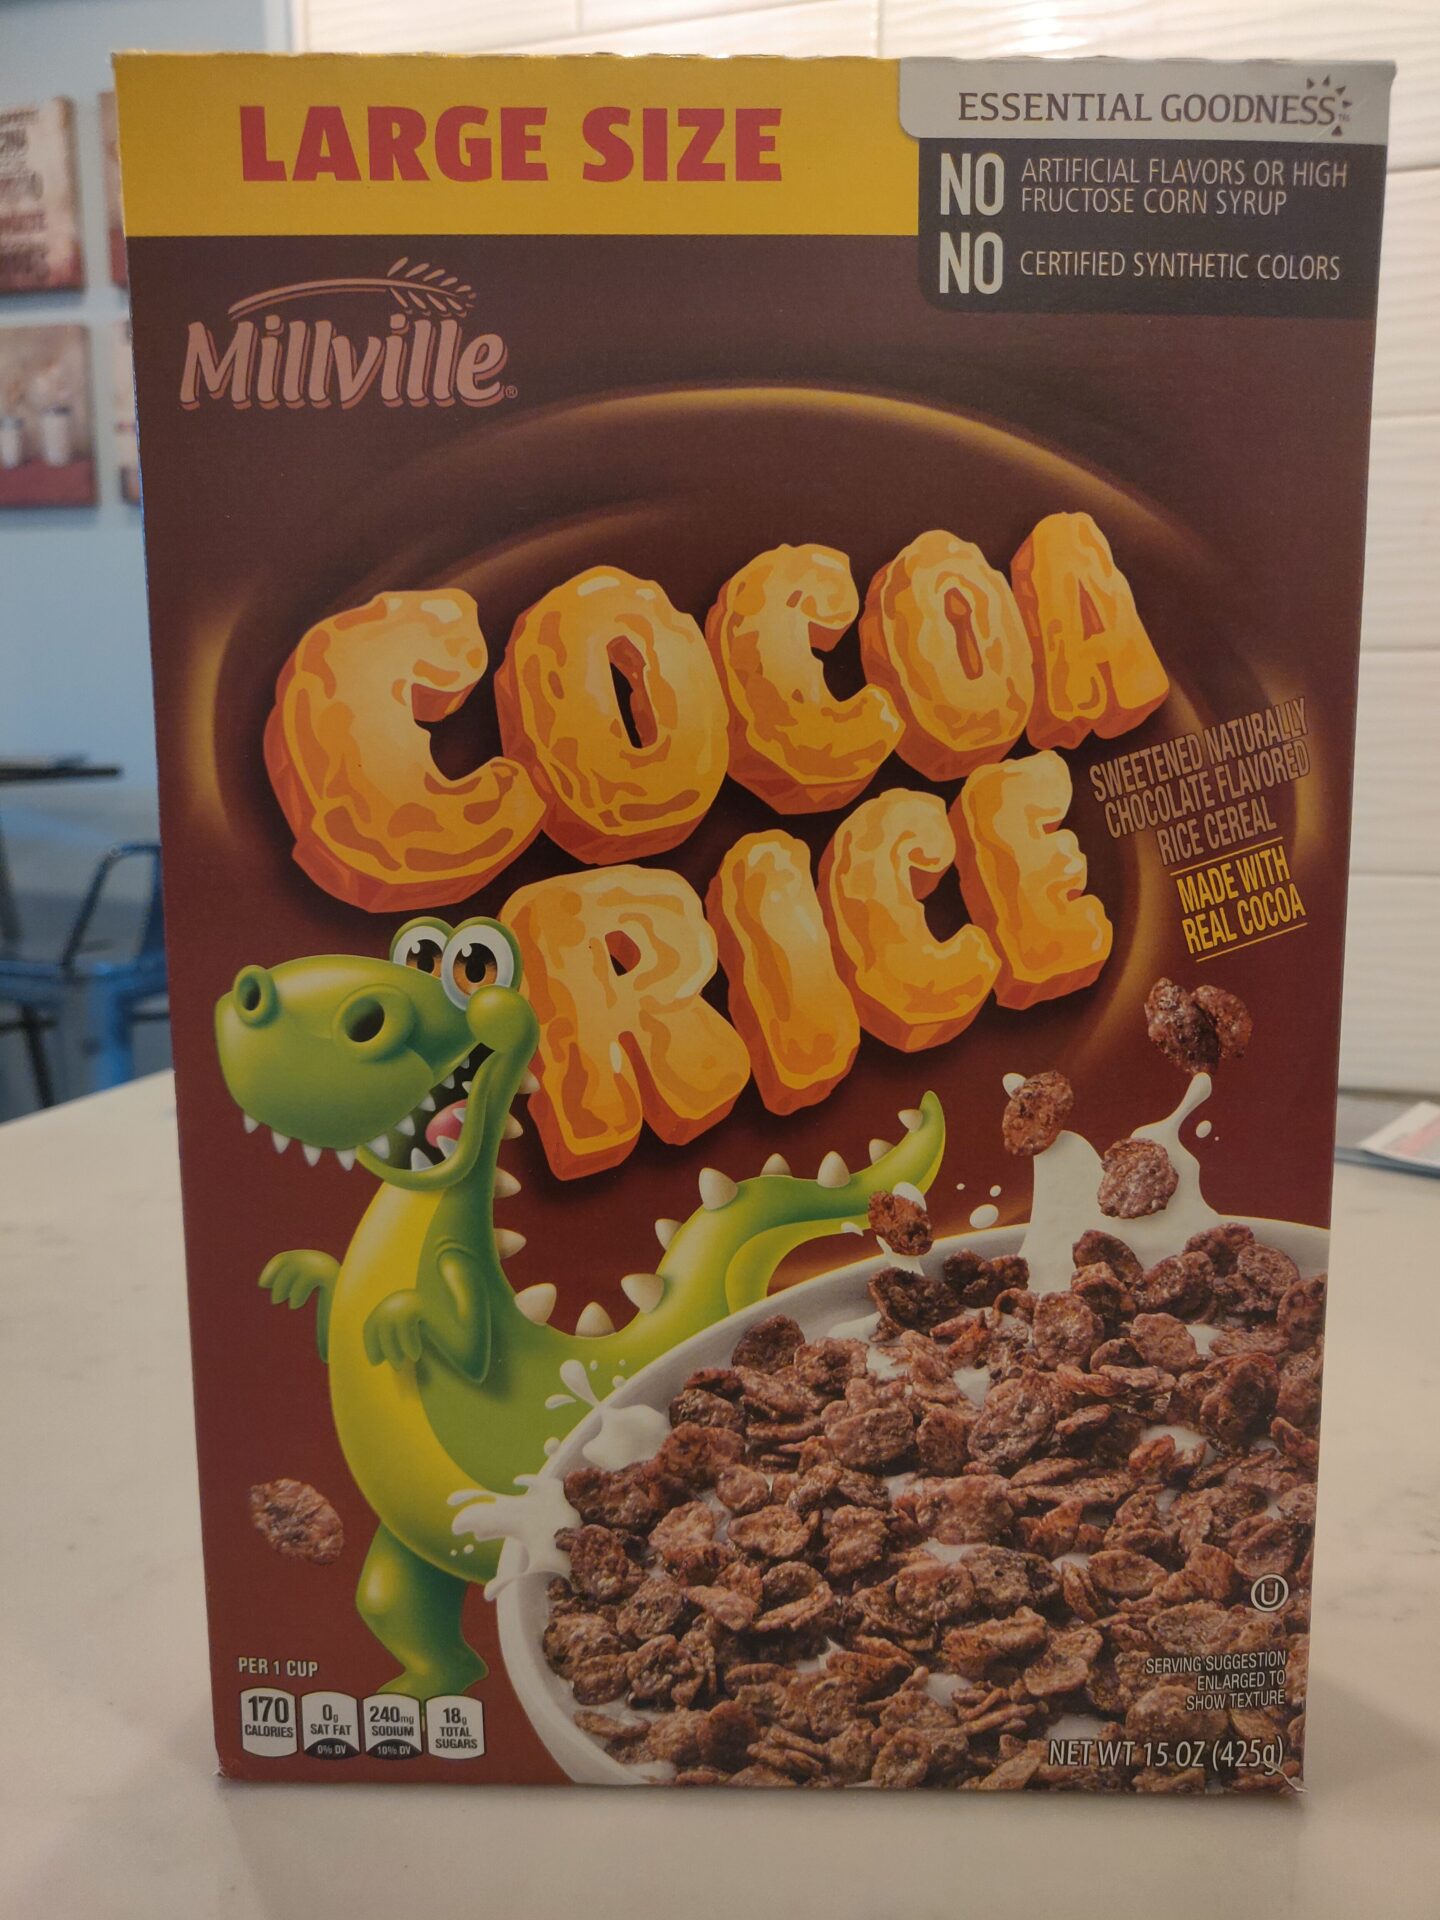 Chocolate Rice Cereal Names